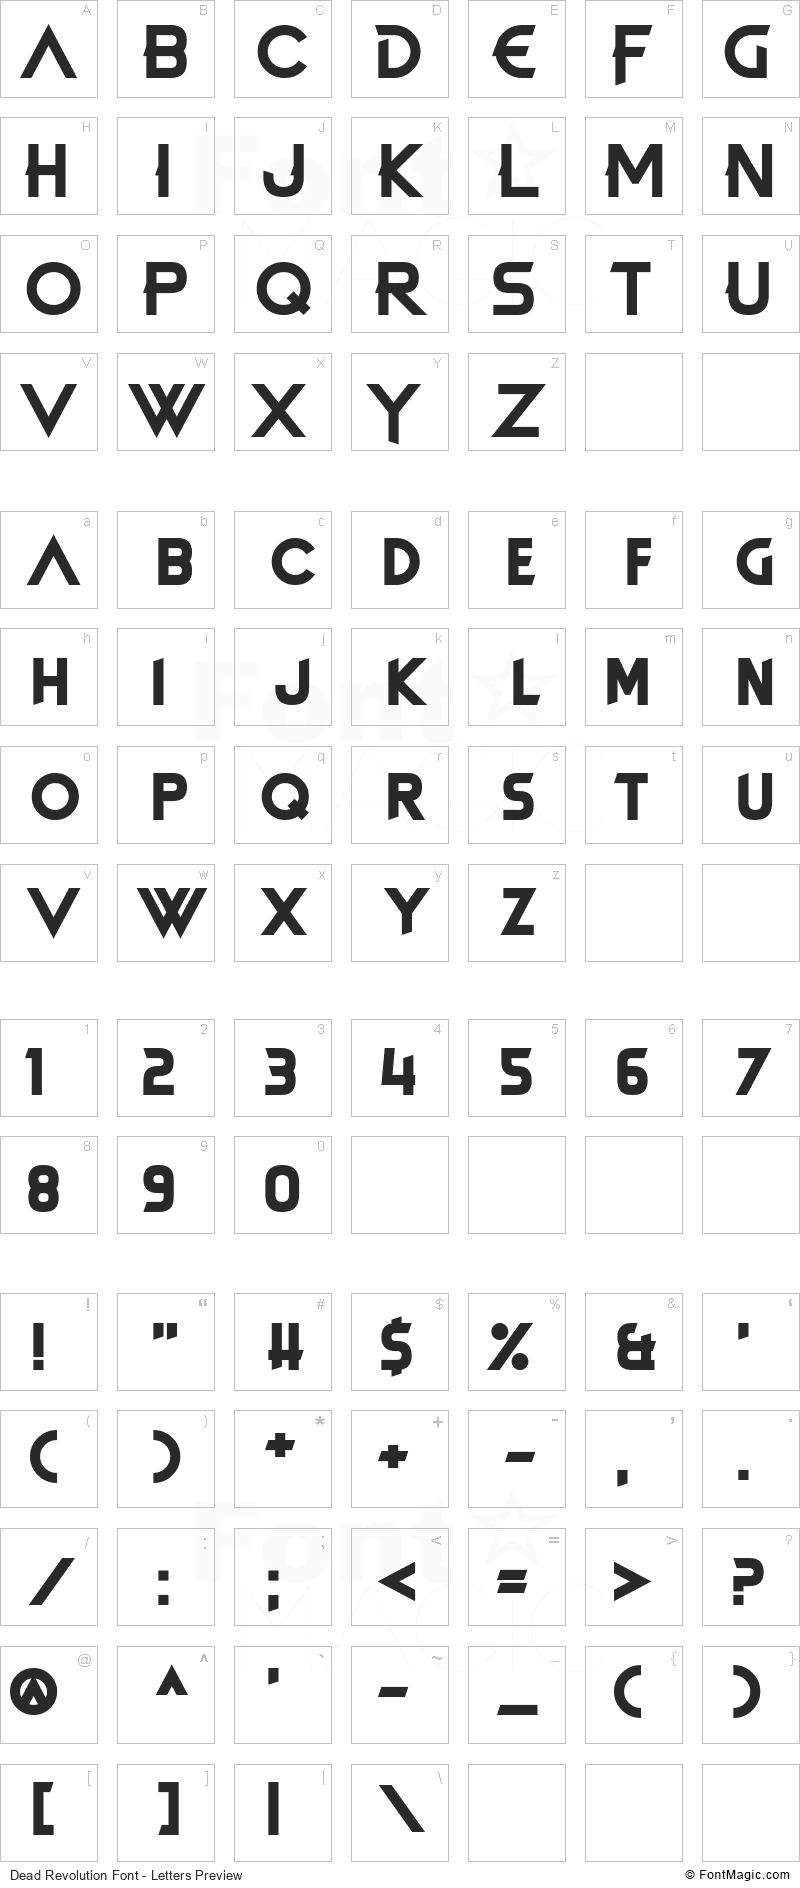 Dead Revolution Font - All Latters Preview Chart